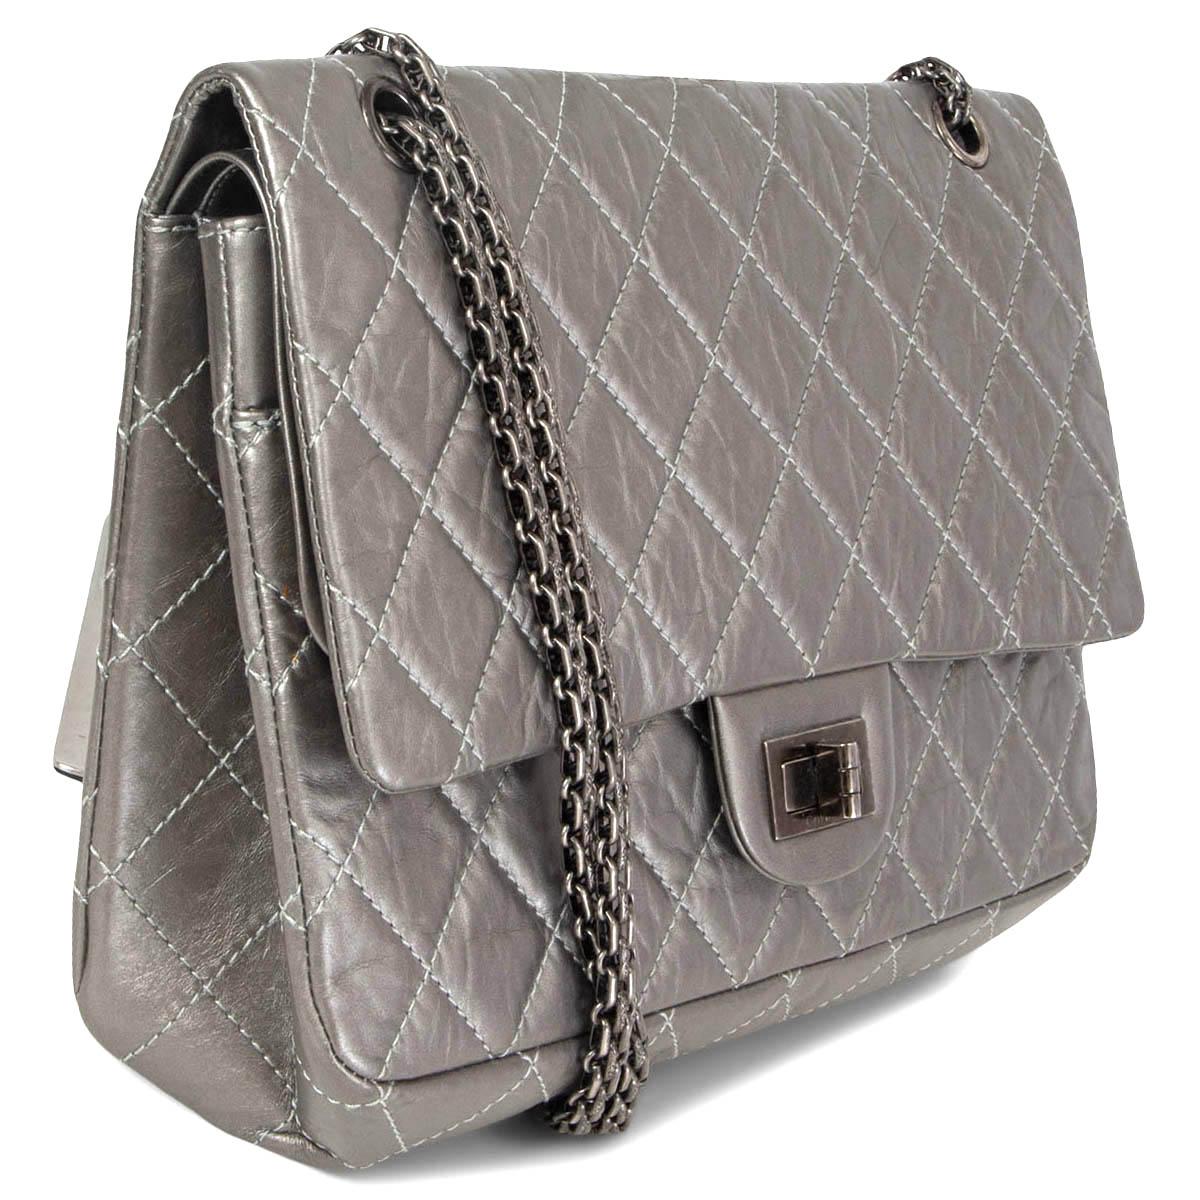 100% authentic Chanel 2.55 Reissue 227 Maxi shoulder bag in metallic grey aged calfskin featuring aged silver-tone hardware. Opens with a classic turn-lock and a flap. Lined in metallic grey smooth calfskin with two patch pockets and one lipstick